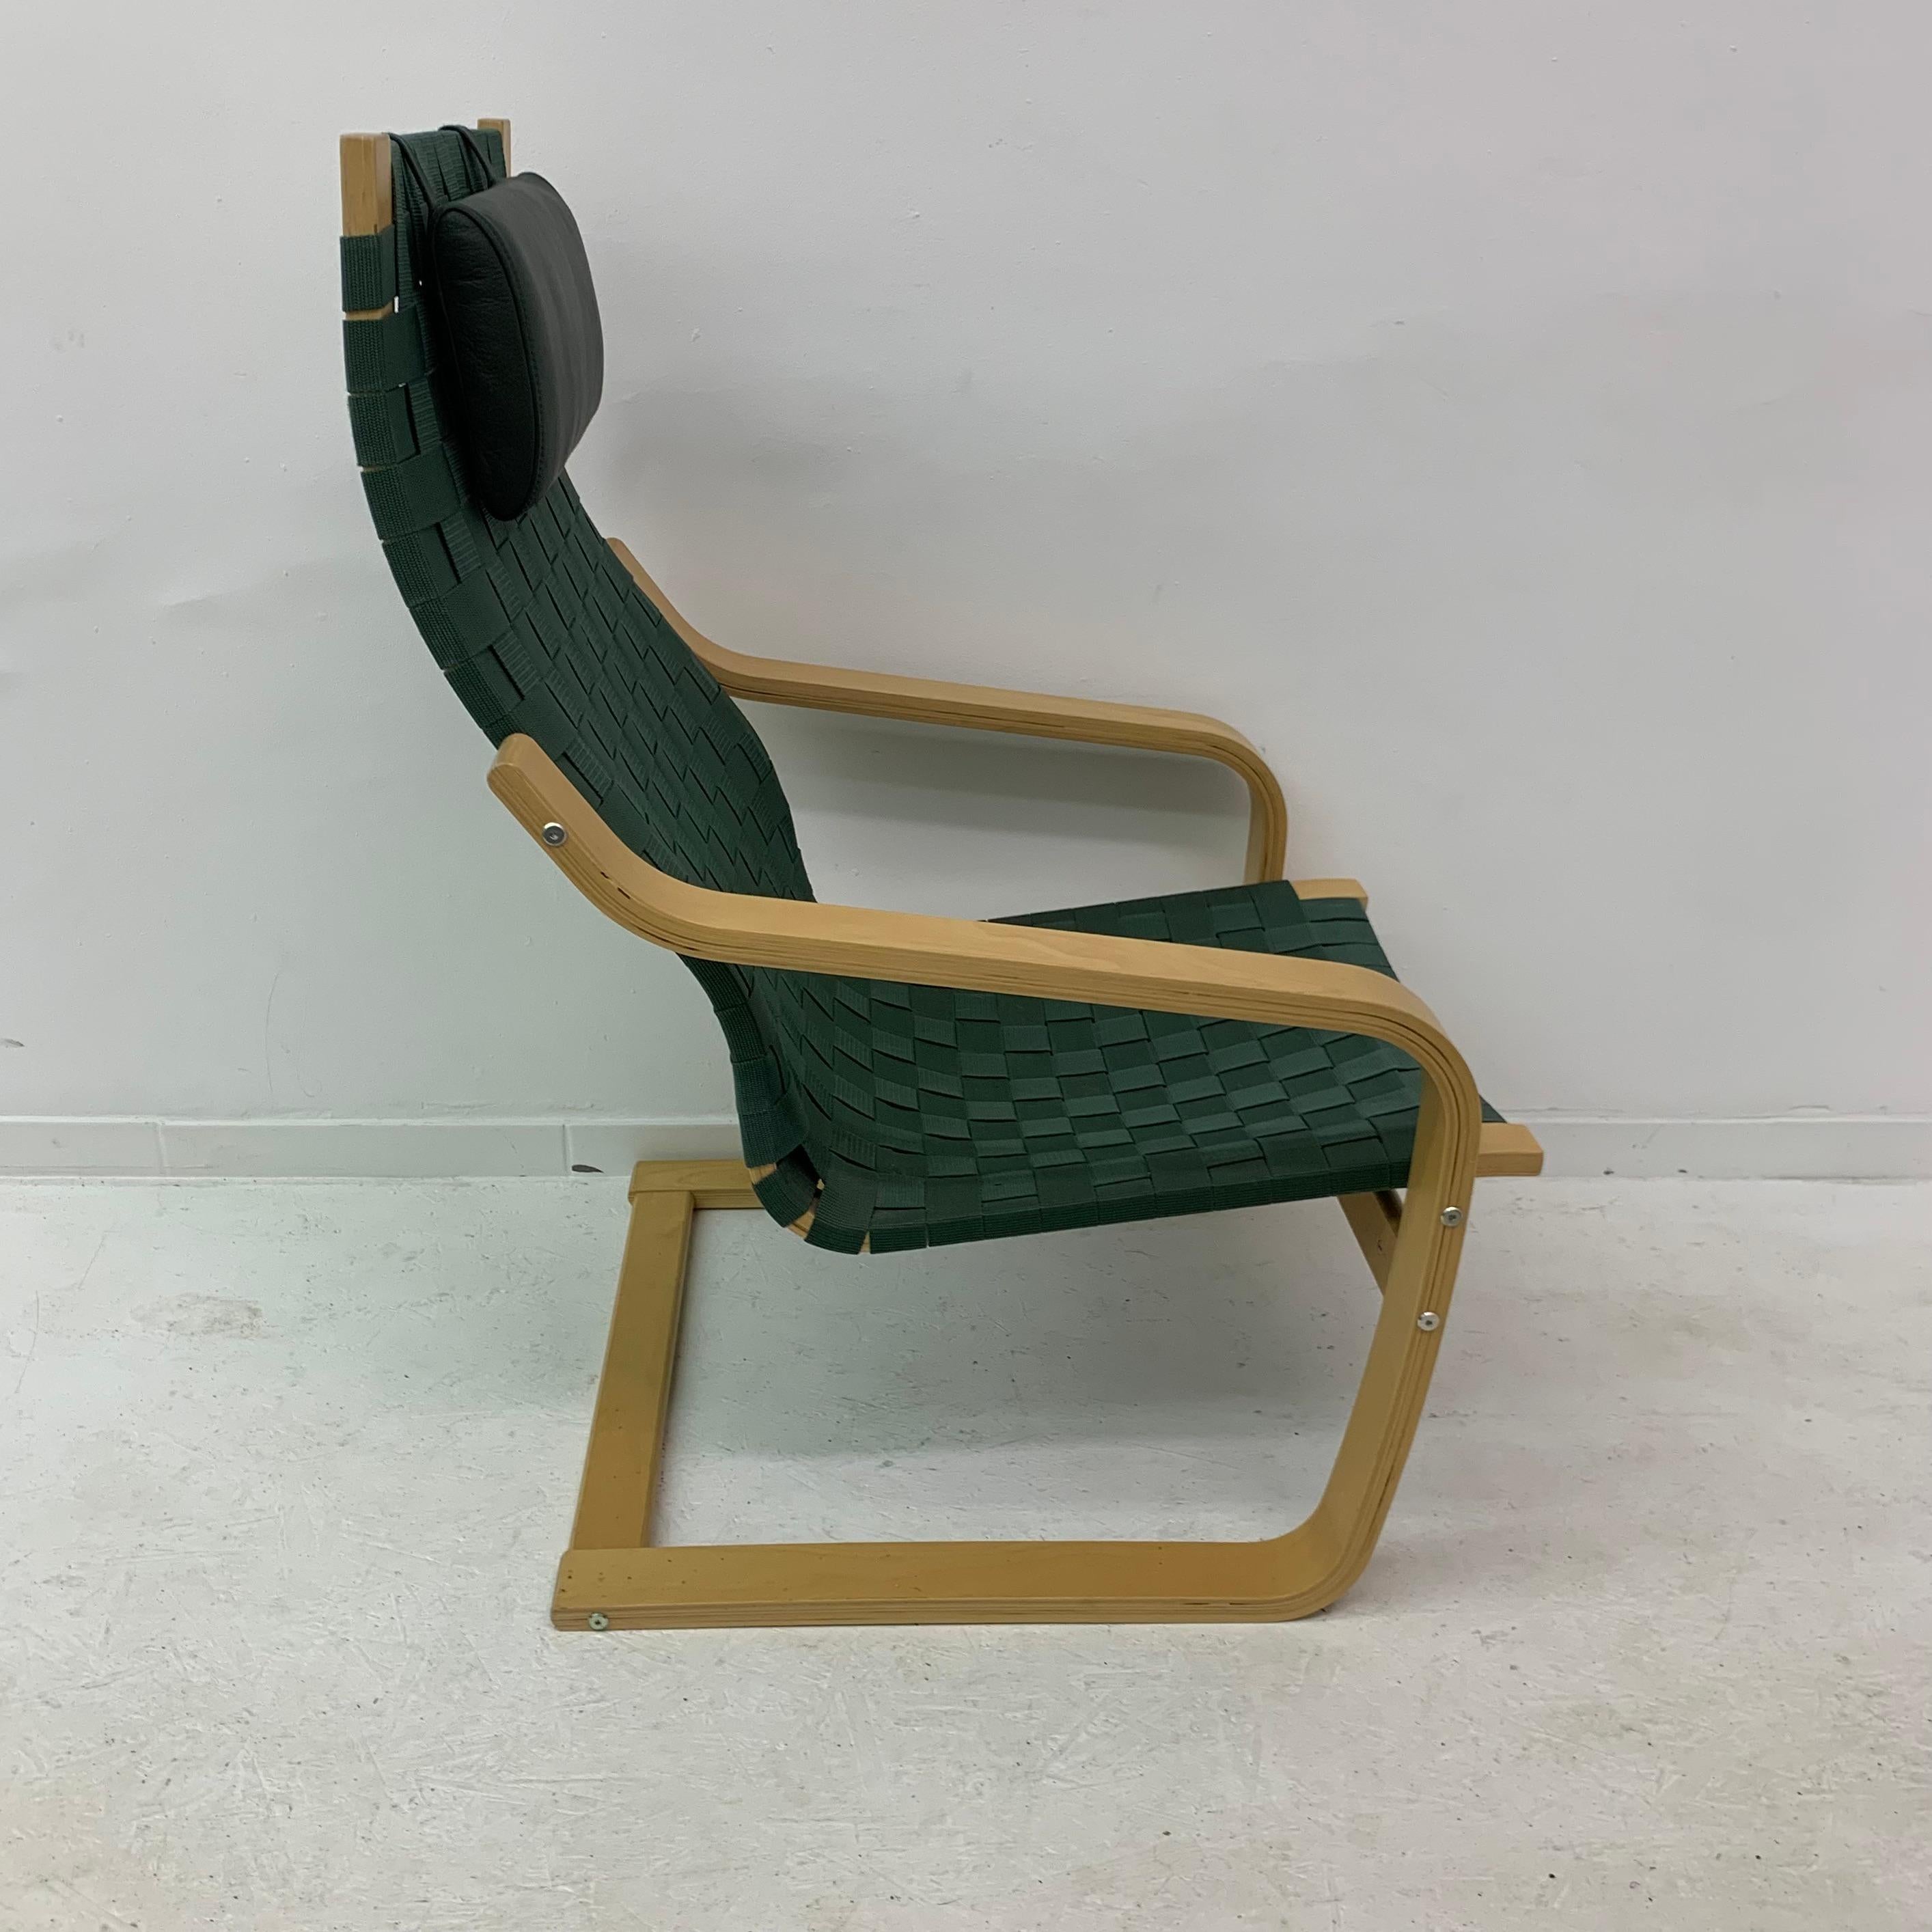 Limited Edition Aalto Tribute Points Chair by Noboru Nakamura for Ikea, 1999 For Sale 5